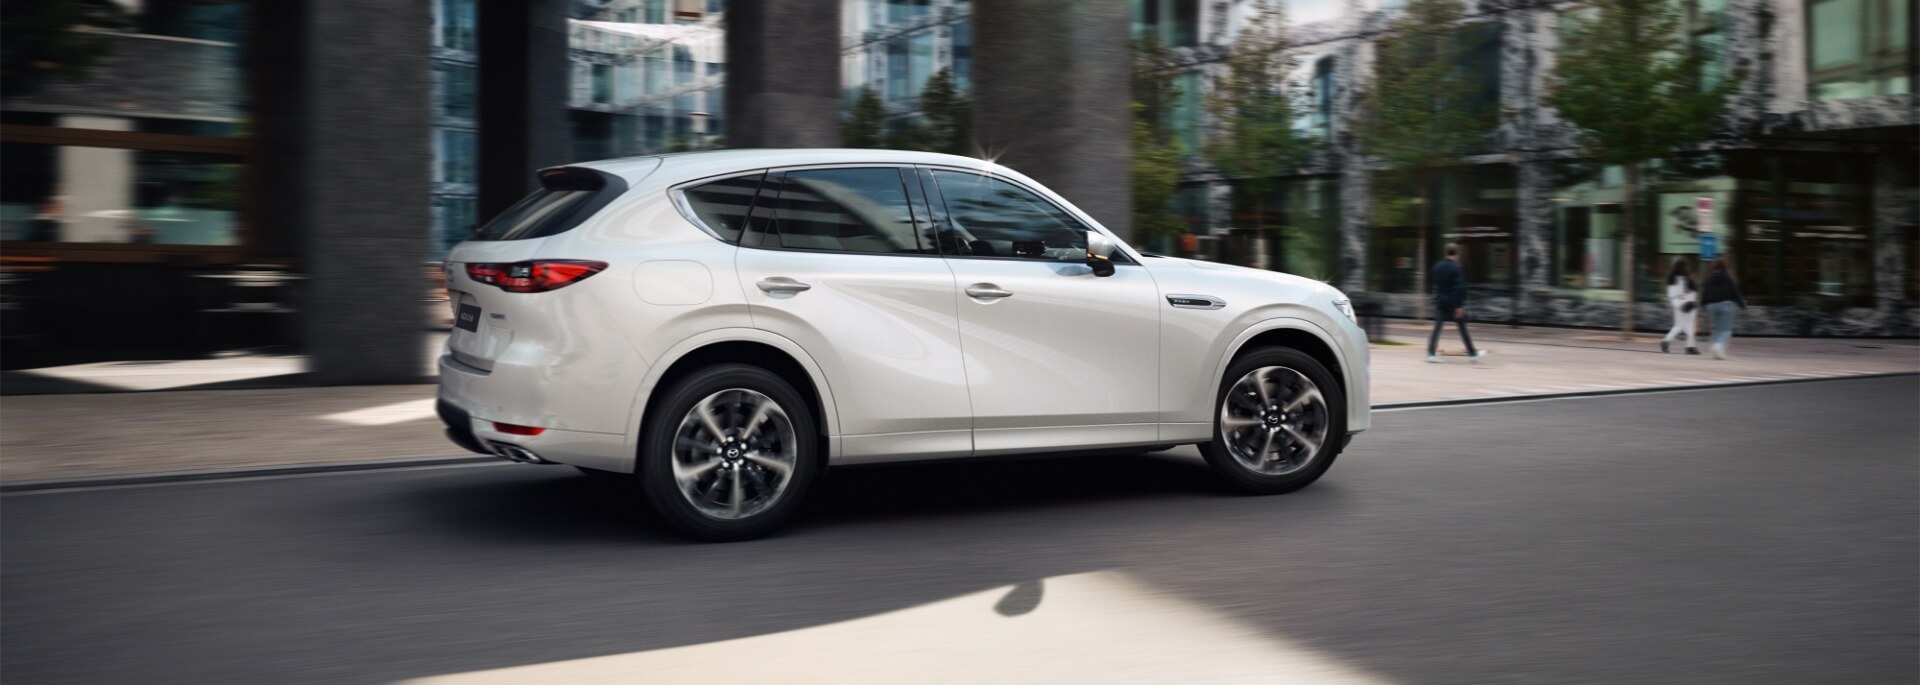 The all-new Mazda CX-60 Plug-In Hybrid SUV shown from the side driving down a city street.